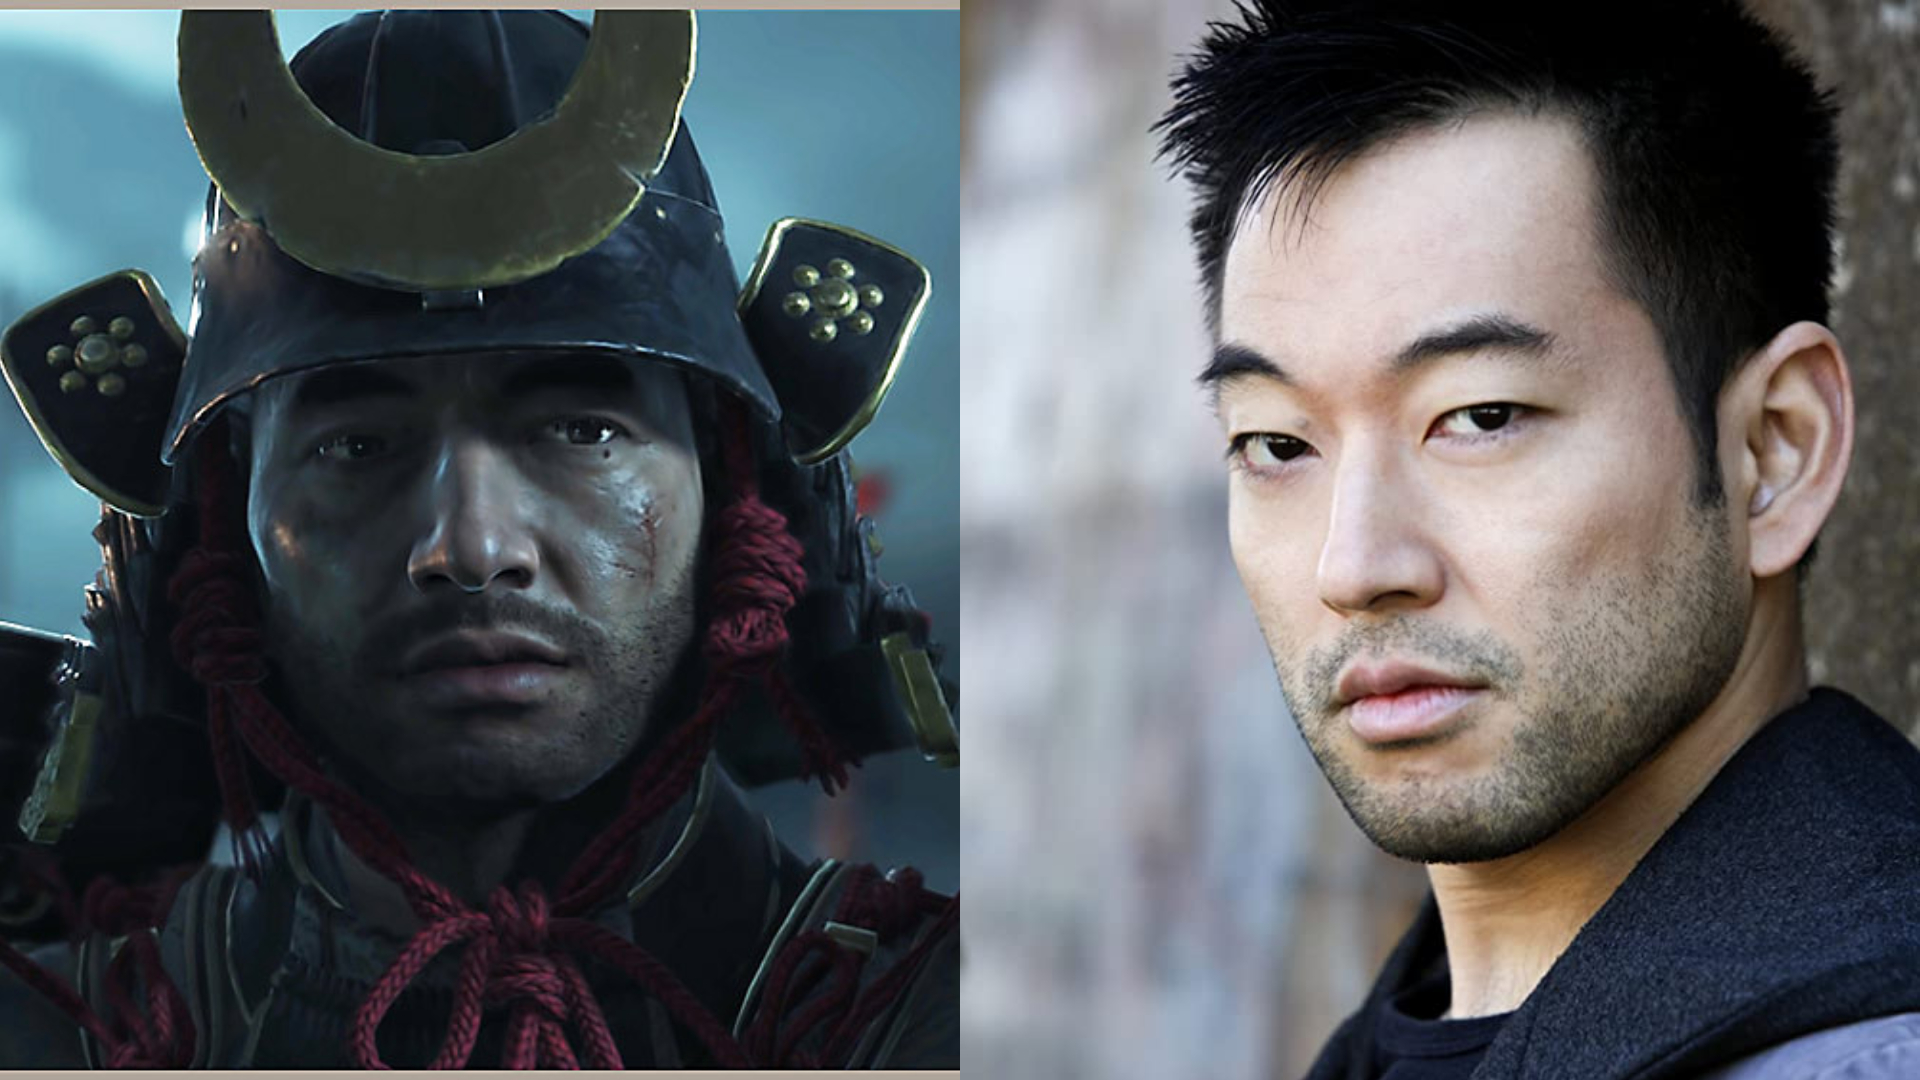 Ghost of Tsushima and This Hot New Anime Have Something Unique in Common